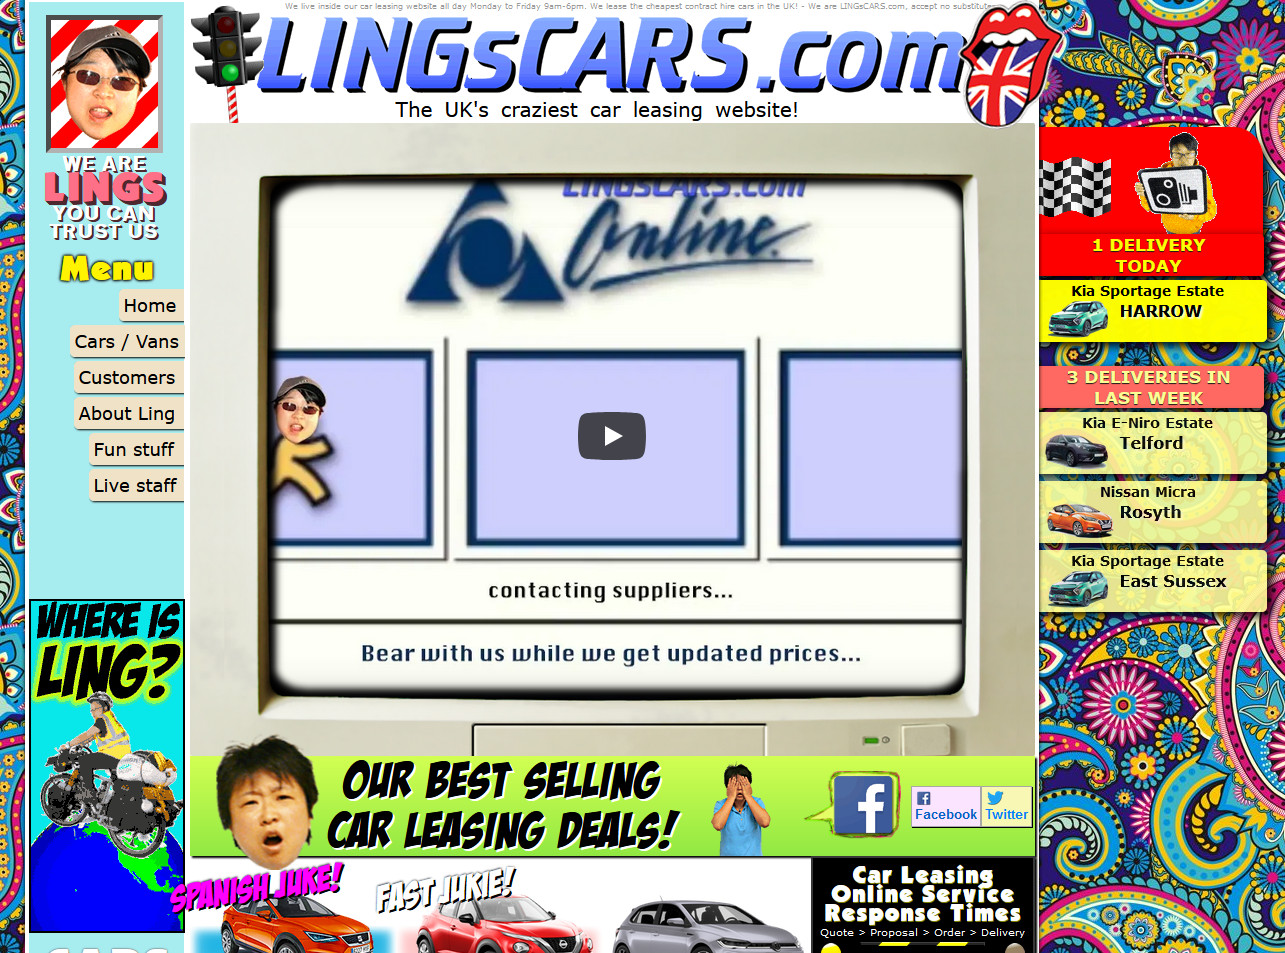 LingsCars homepage showing the worst of 90's design elements